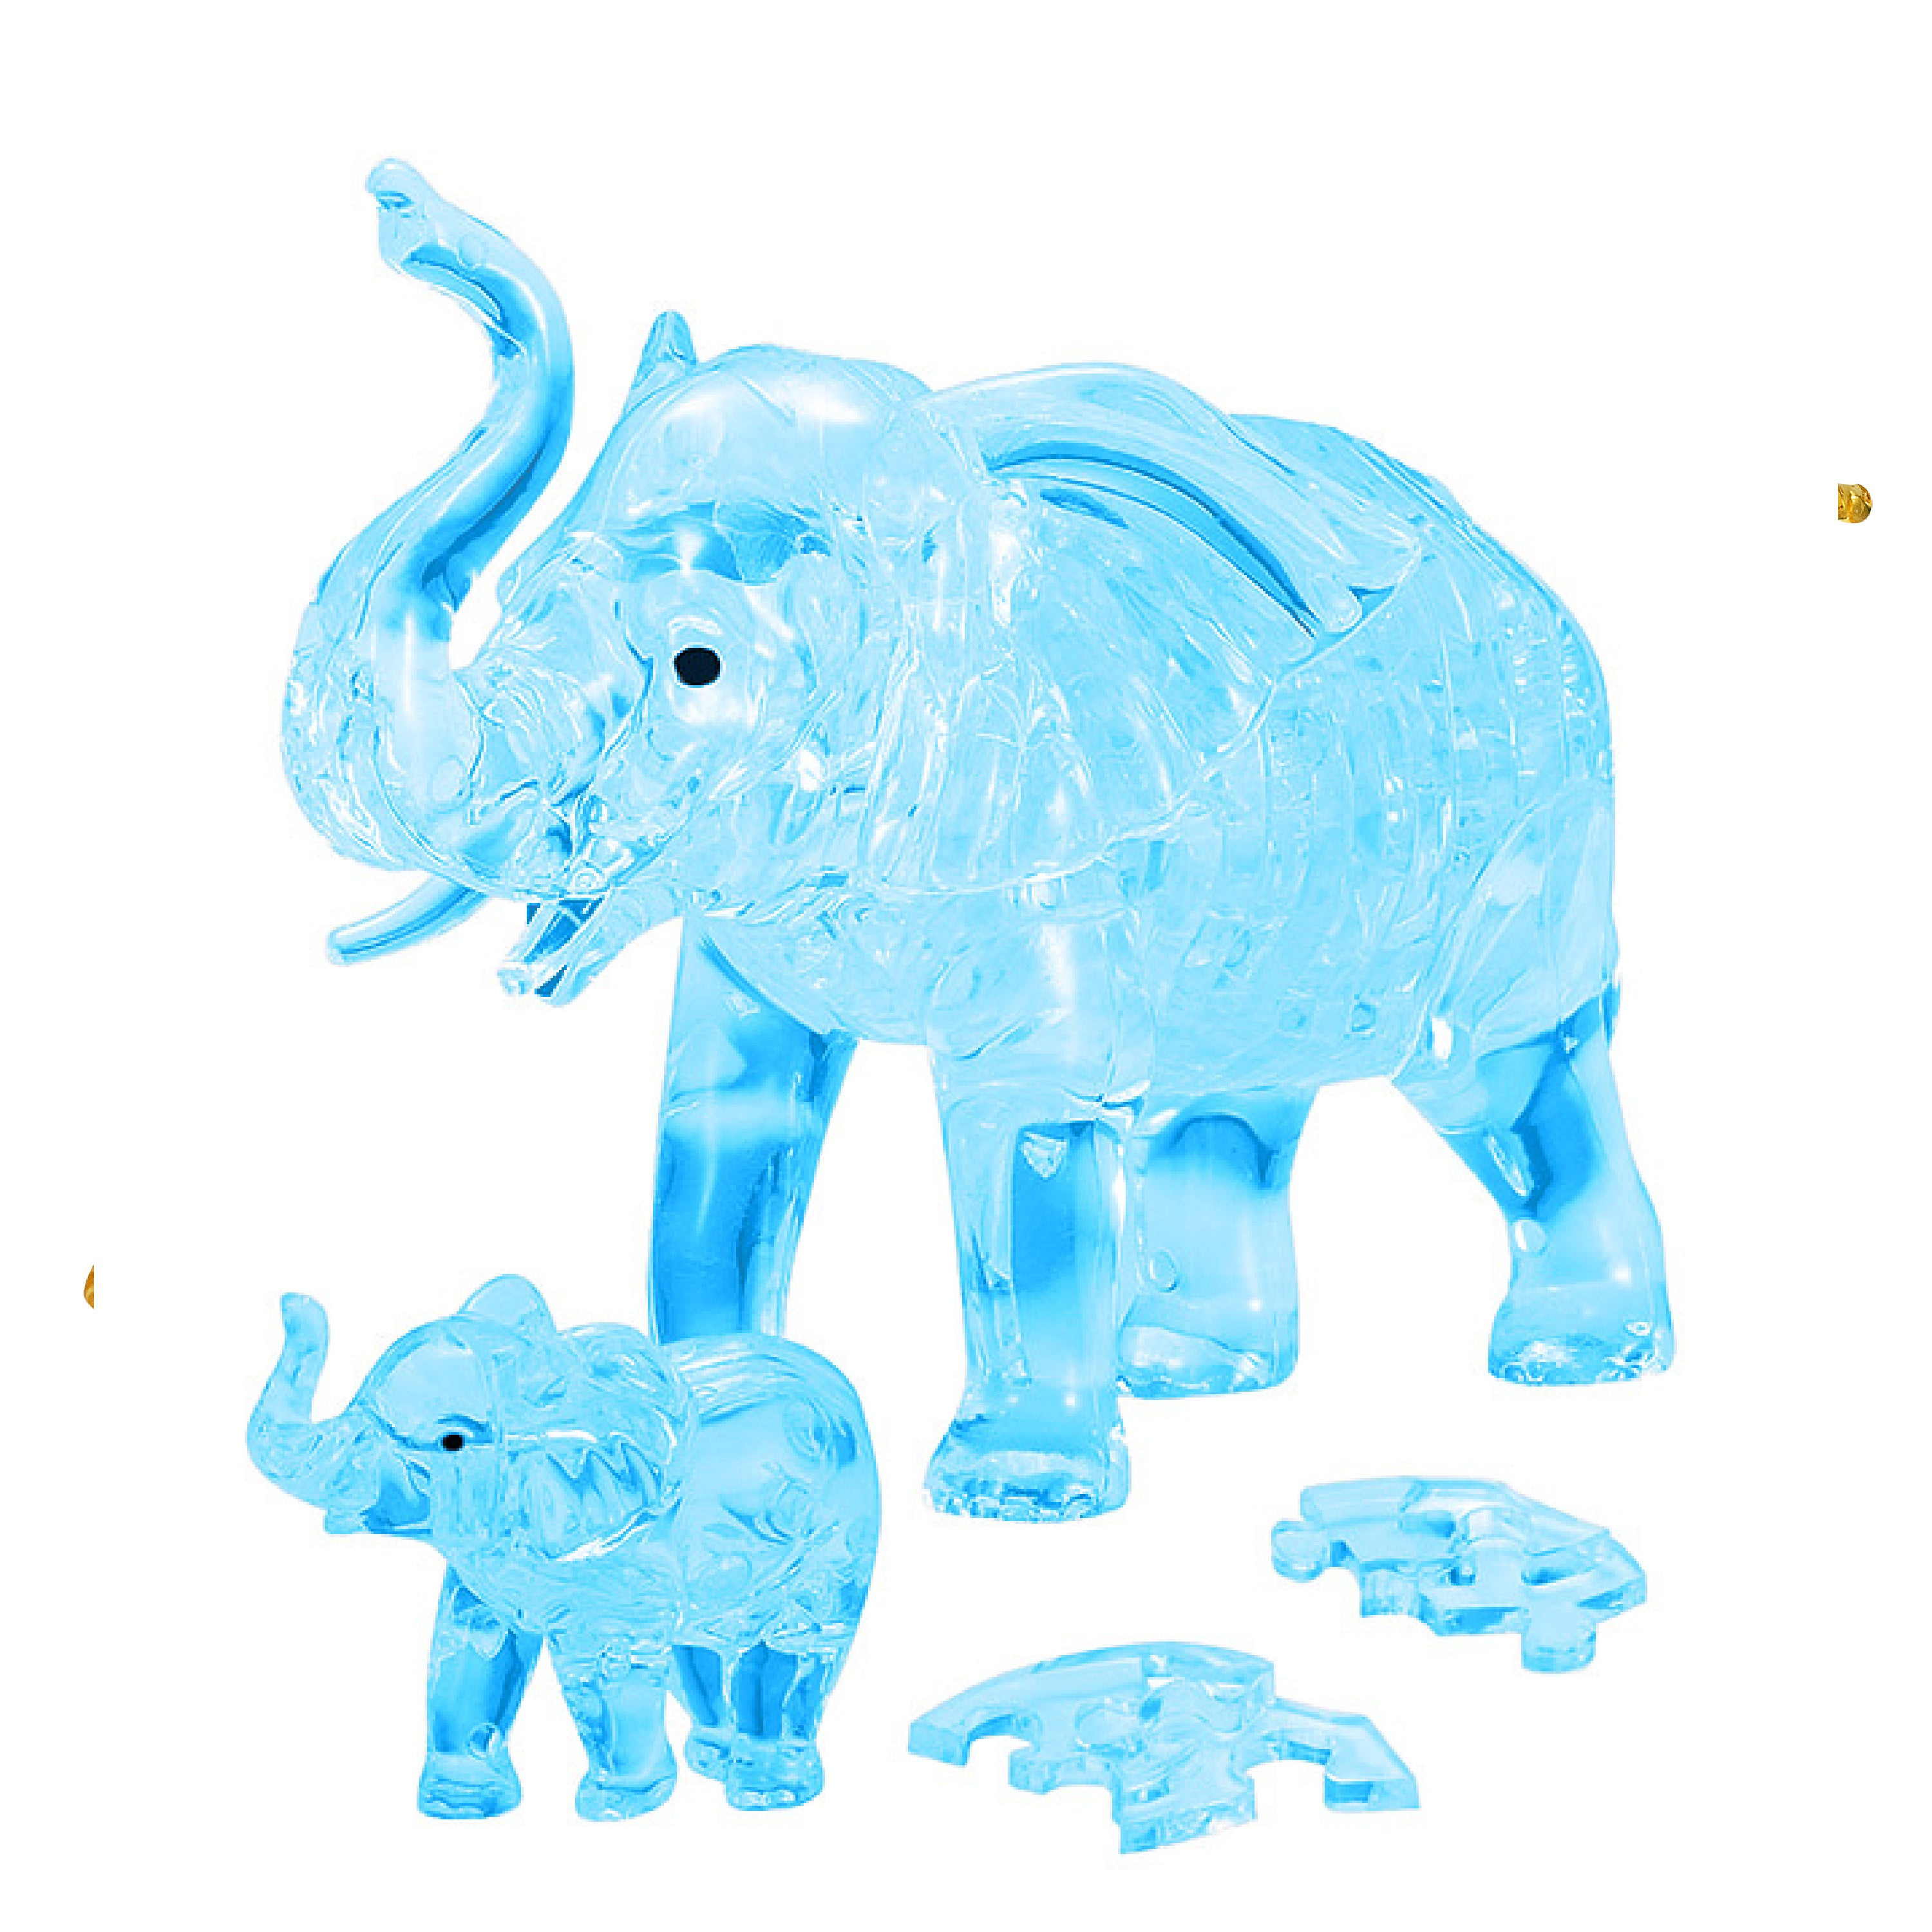 3D Crystal Puzzle: Elephant & Baby